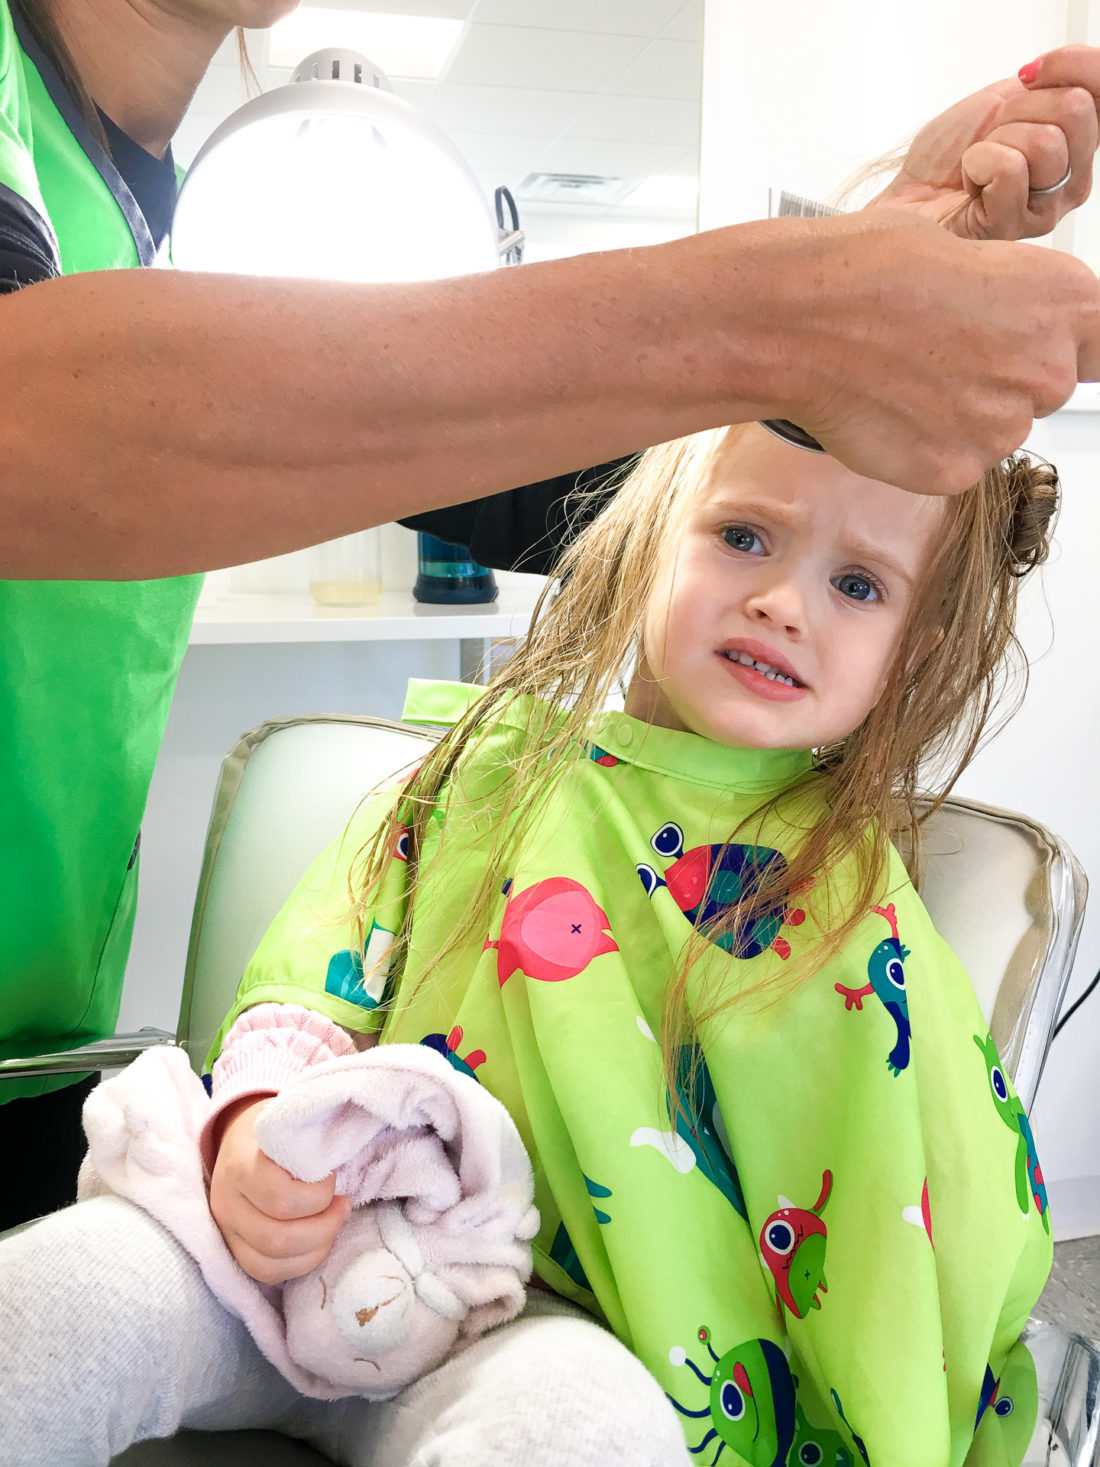 Marlowe Martino gets her hair treated for lice at a special salon in Connecticut